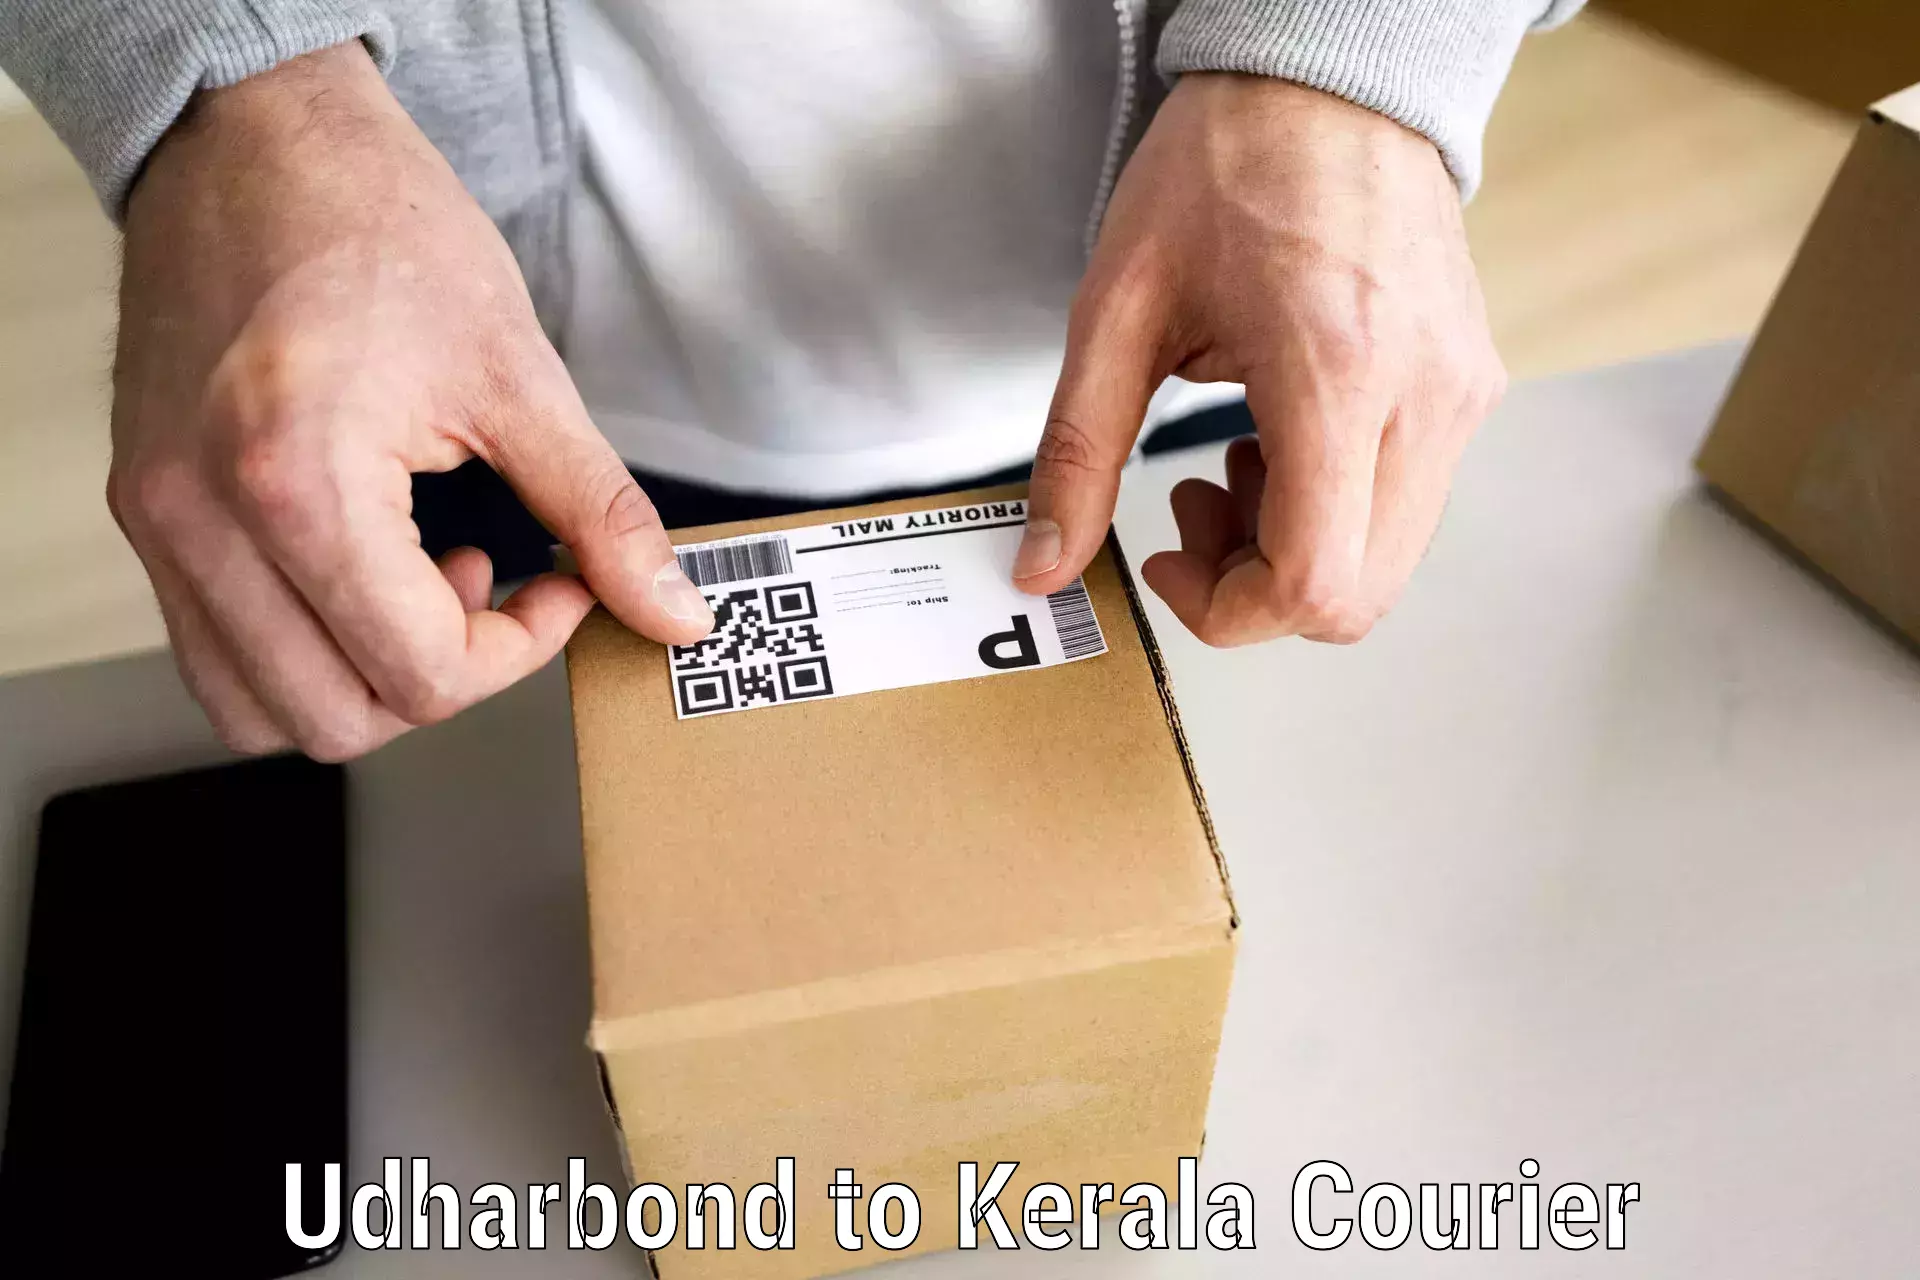 Budget-friendly moving services in Udharbond to Karimba